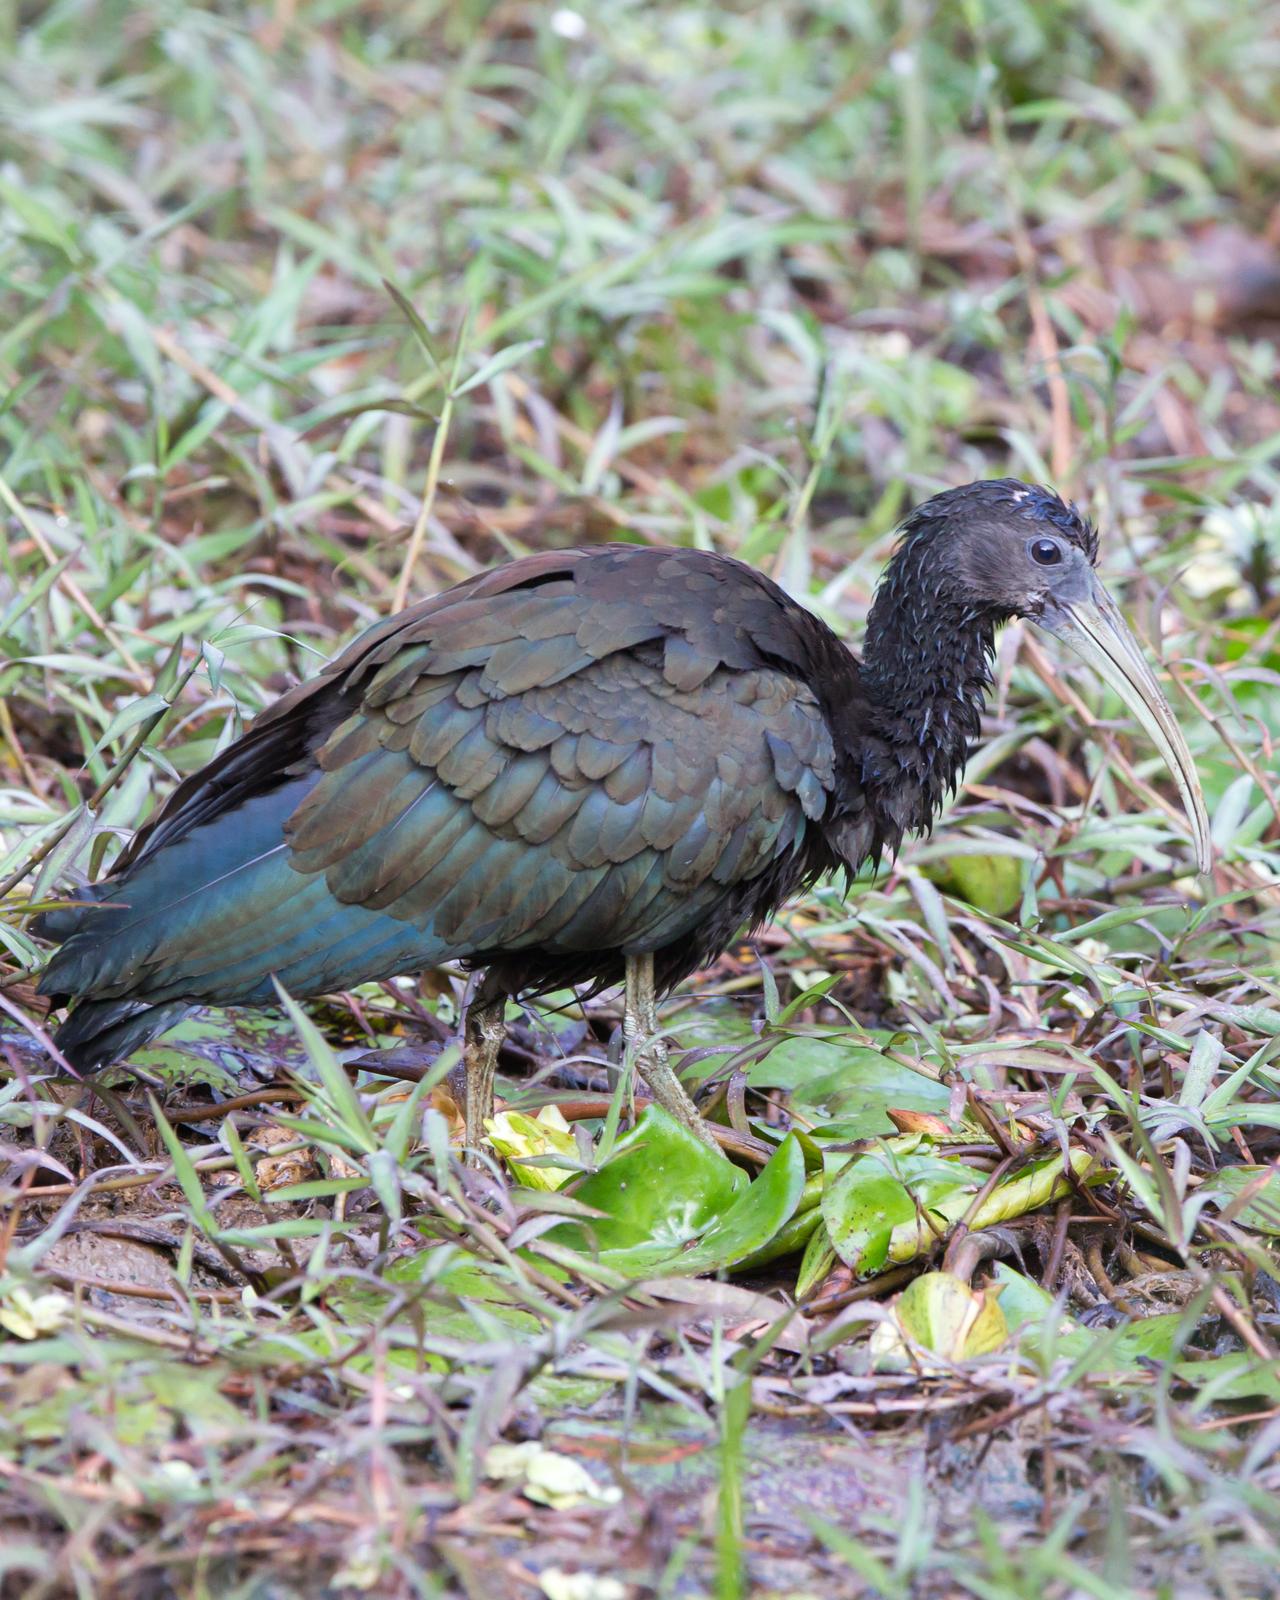 Green Ibis Photo by Kevin Berkoff